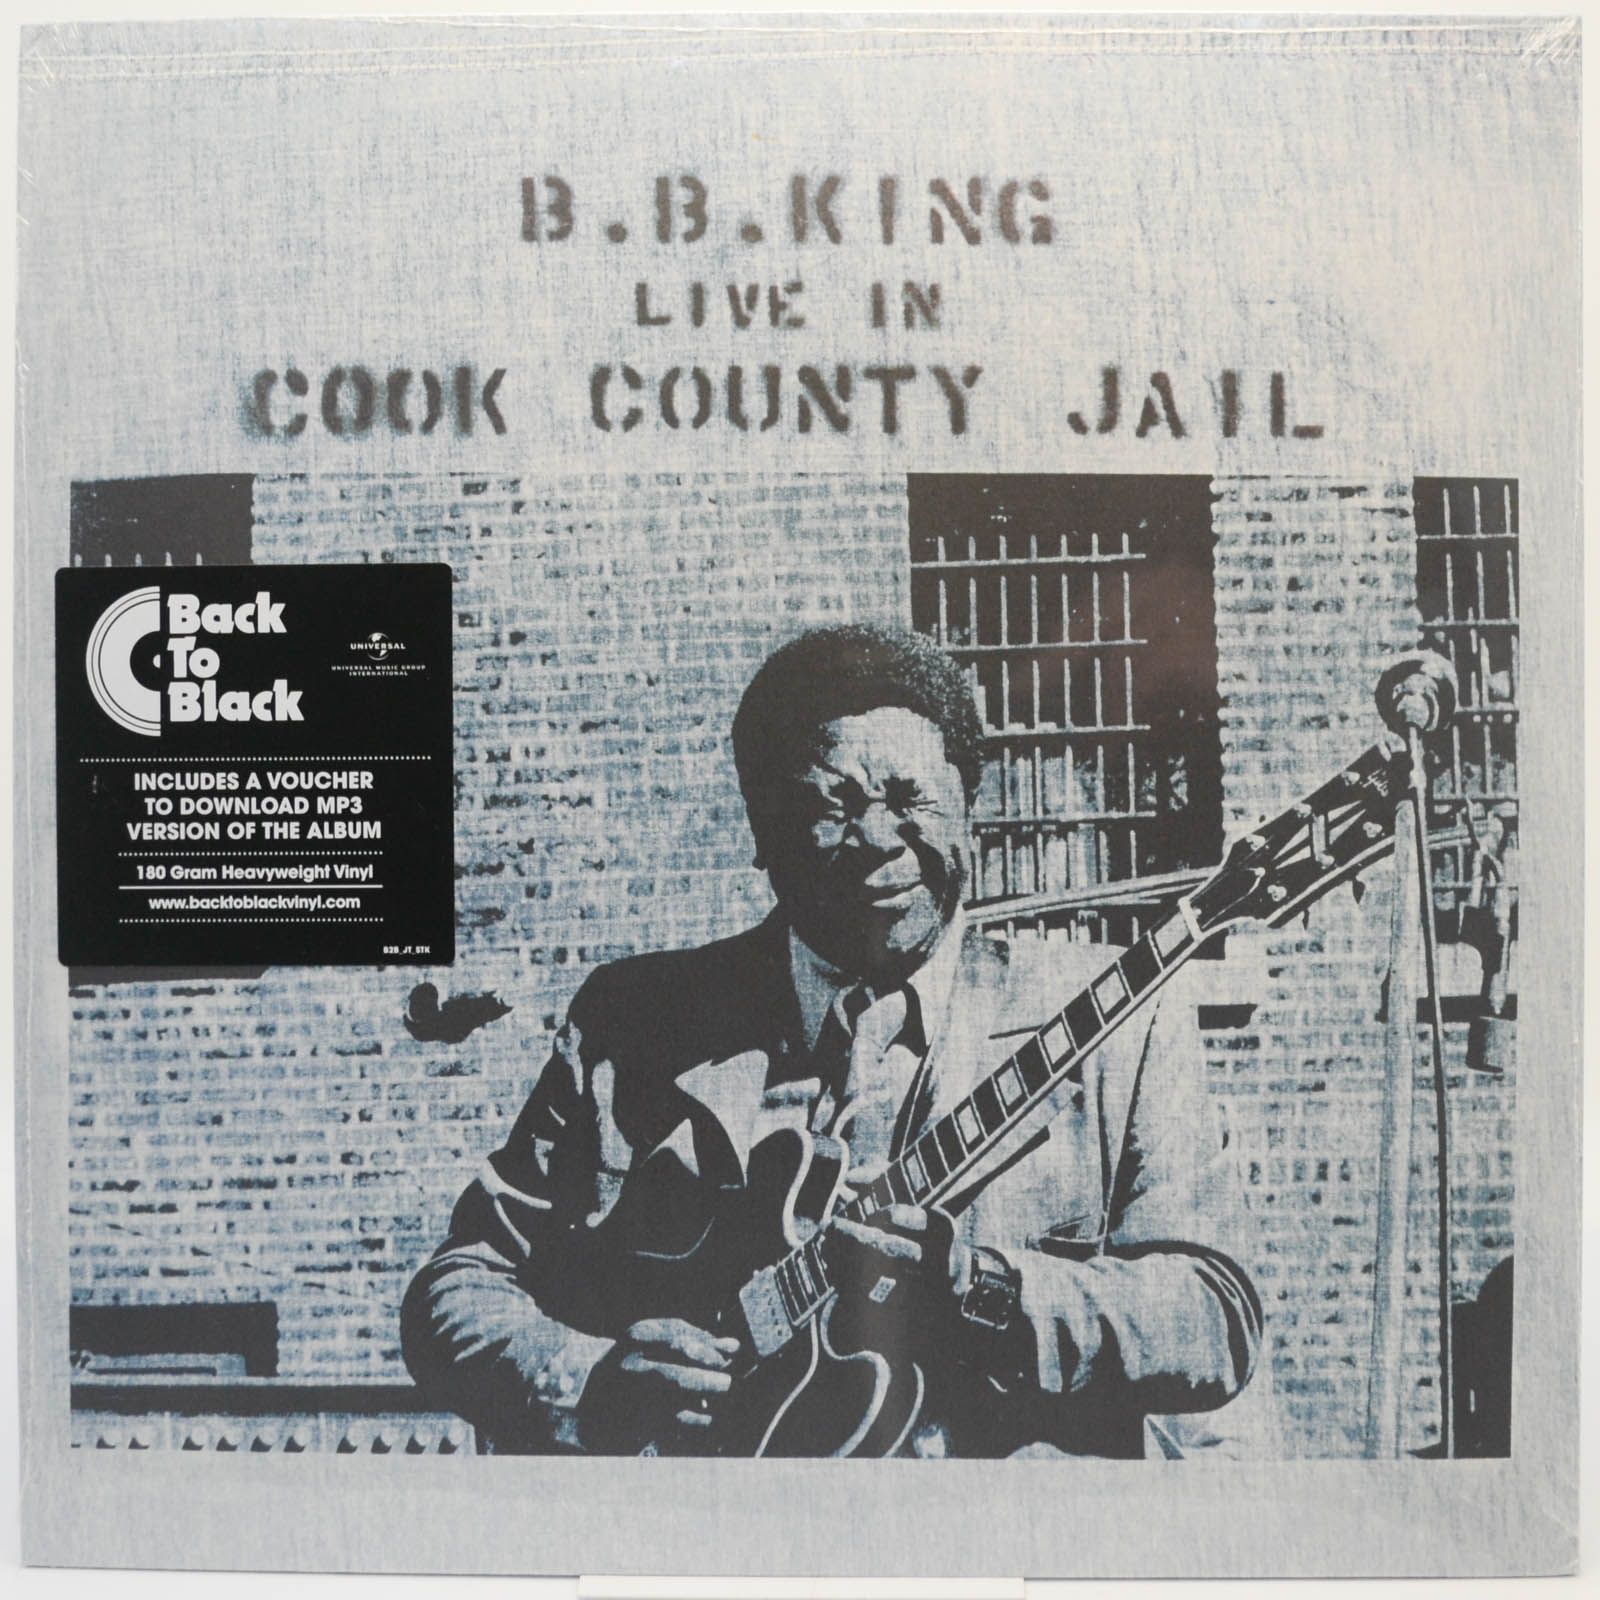 B.B. King — Live In Cook County Jail, 1971